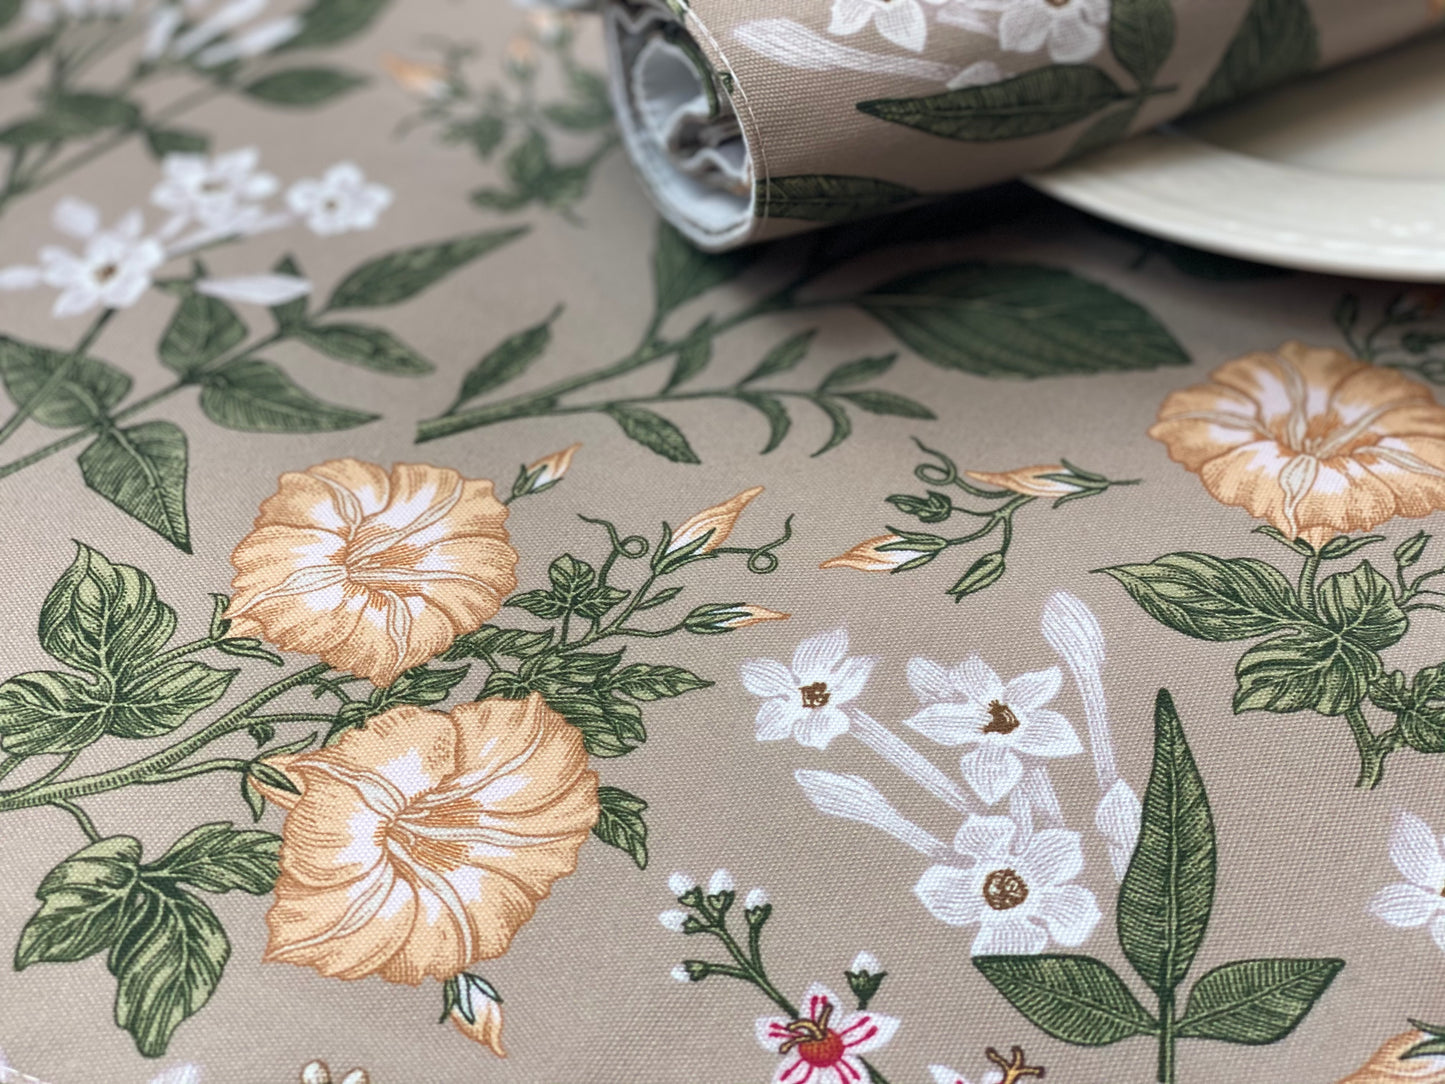 Set of 4 Vintage Flowers Placemat, Petunia Jasmine croton wildflowers Pattern, Washable Cotton Placemat for fall dining table